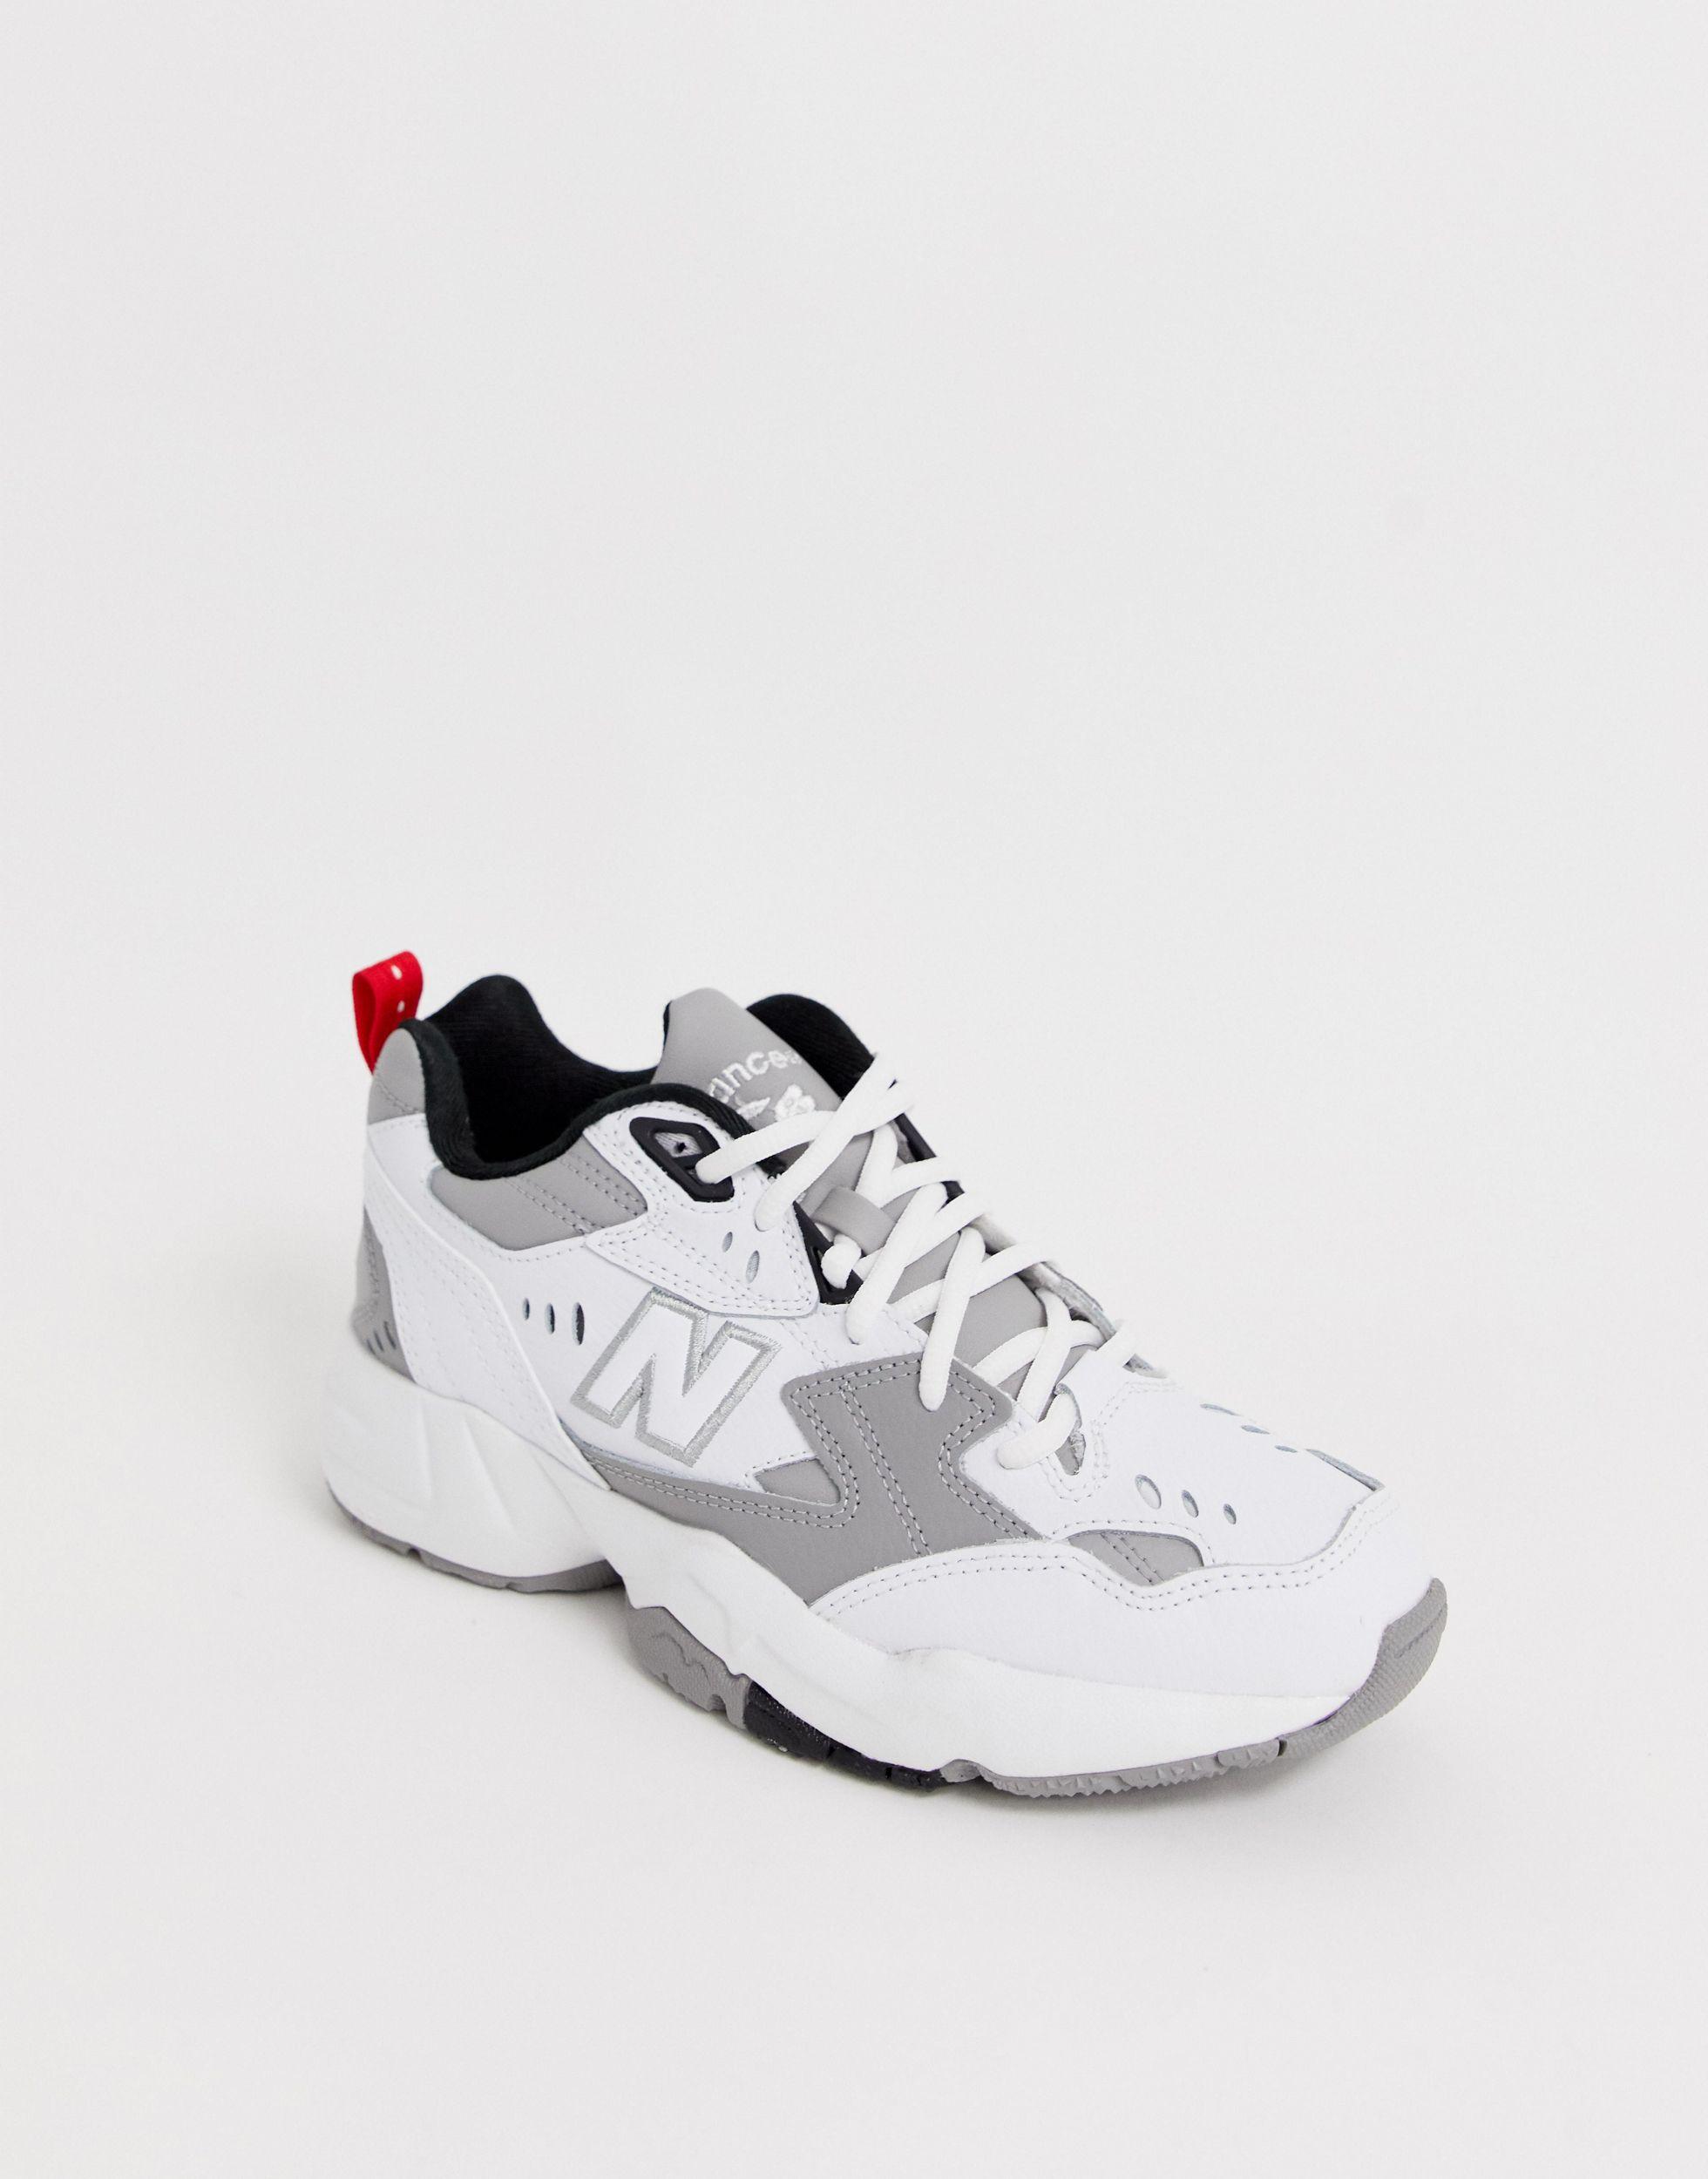 trembling Dignified footsteps New Balance 608 White And Gray Chunky Sneakers | Lyst